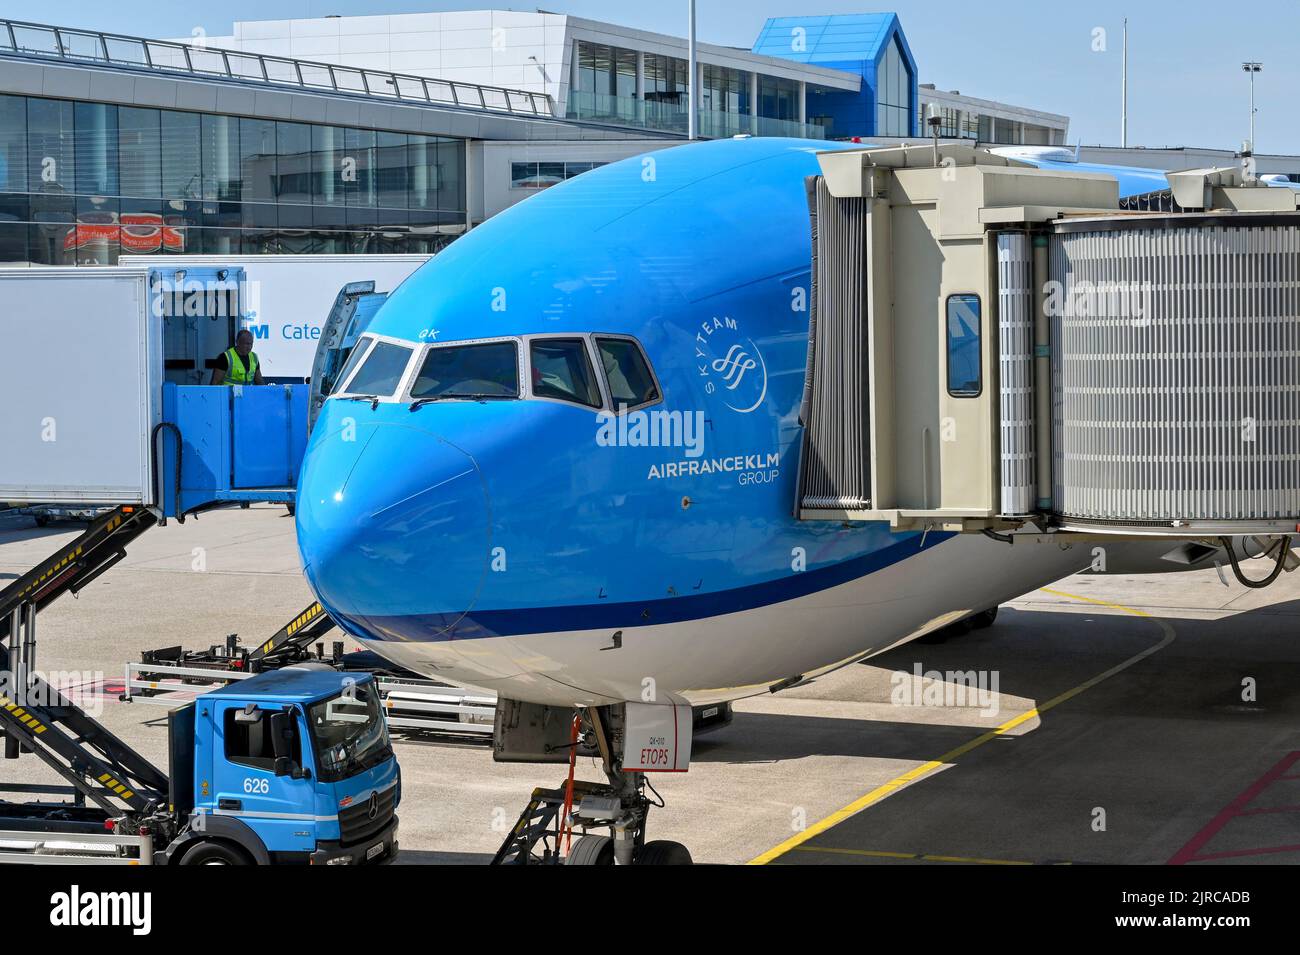 Amsterdam, Netherlands - August 2022: KLM Boeing 777 jet being loaded with catering supplies using a scissor lift truck at Schipol airport Stock Photo